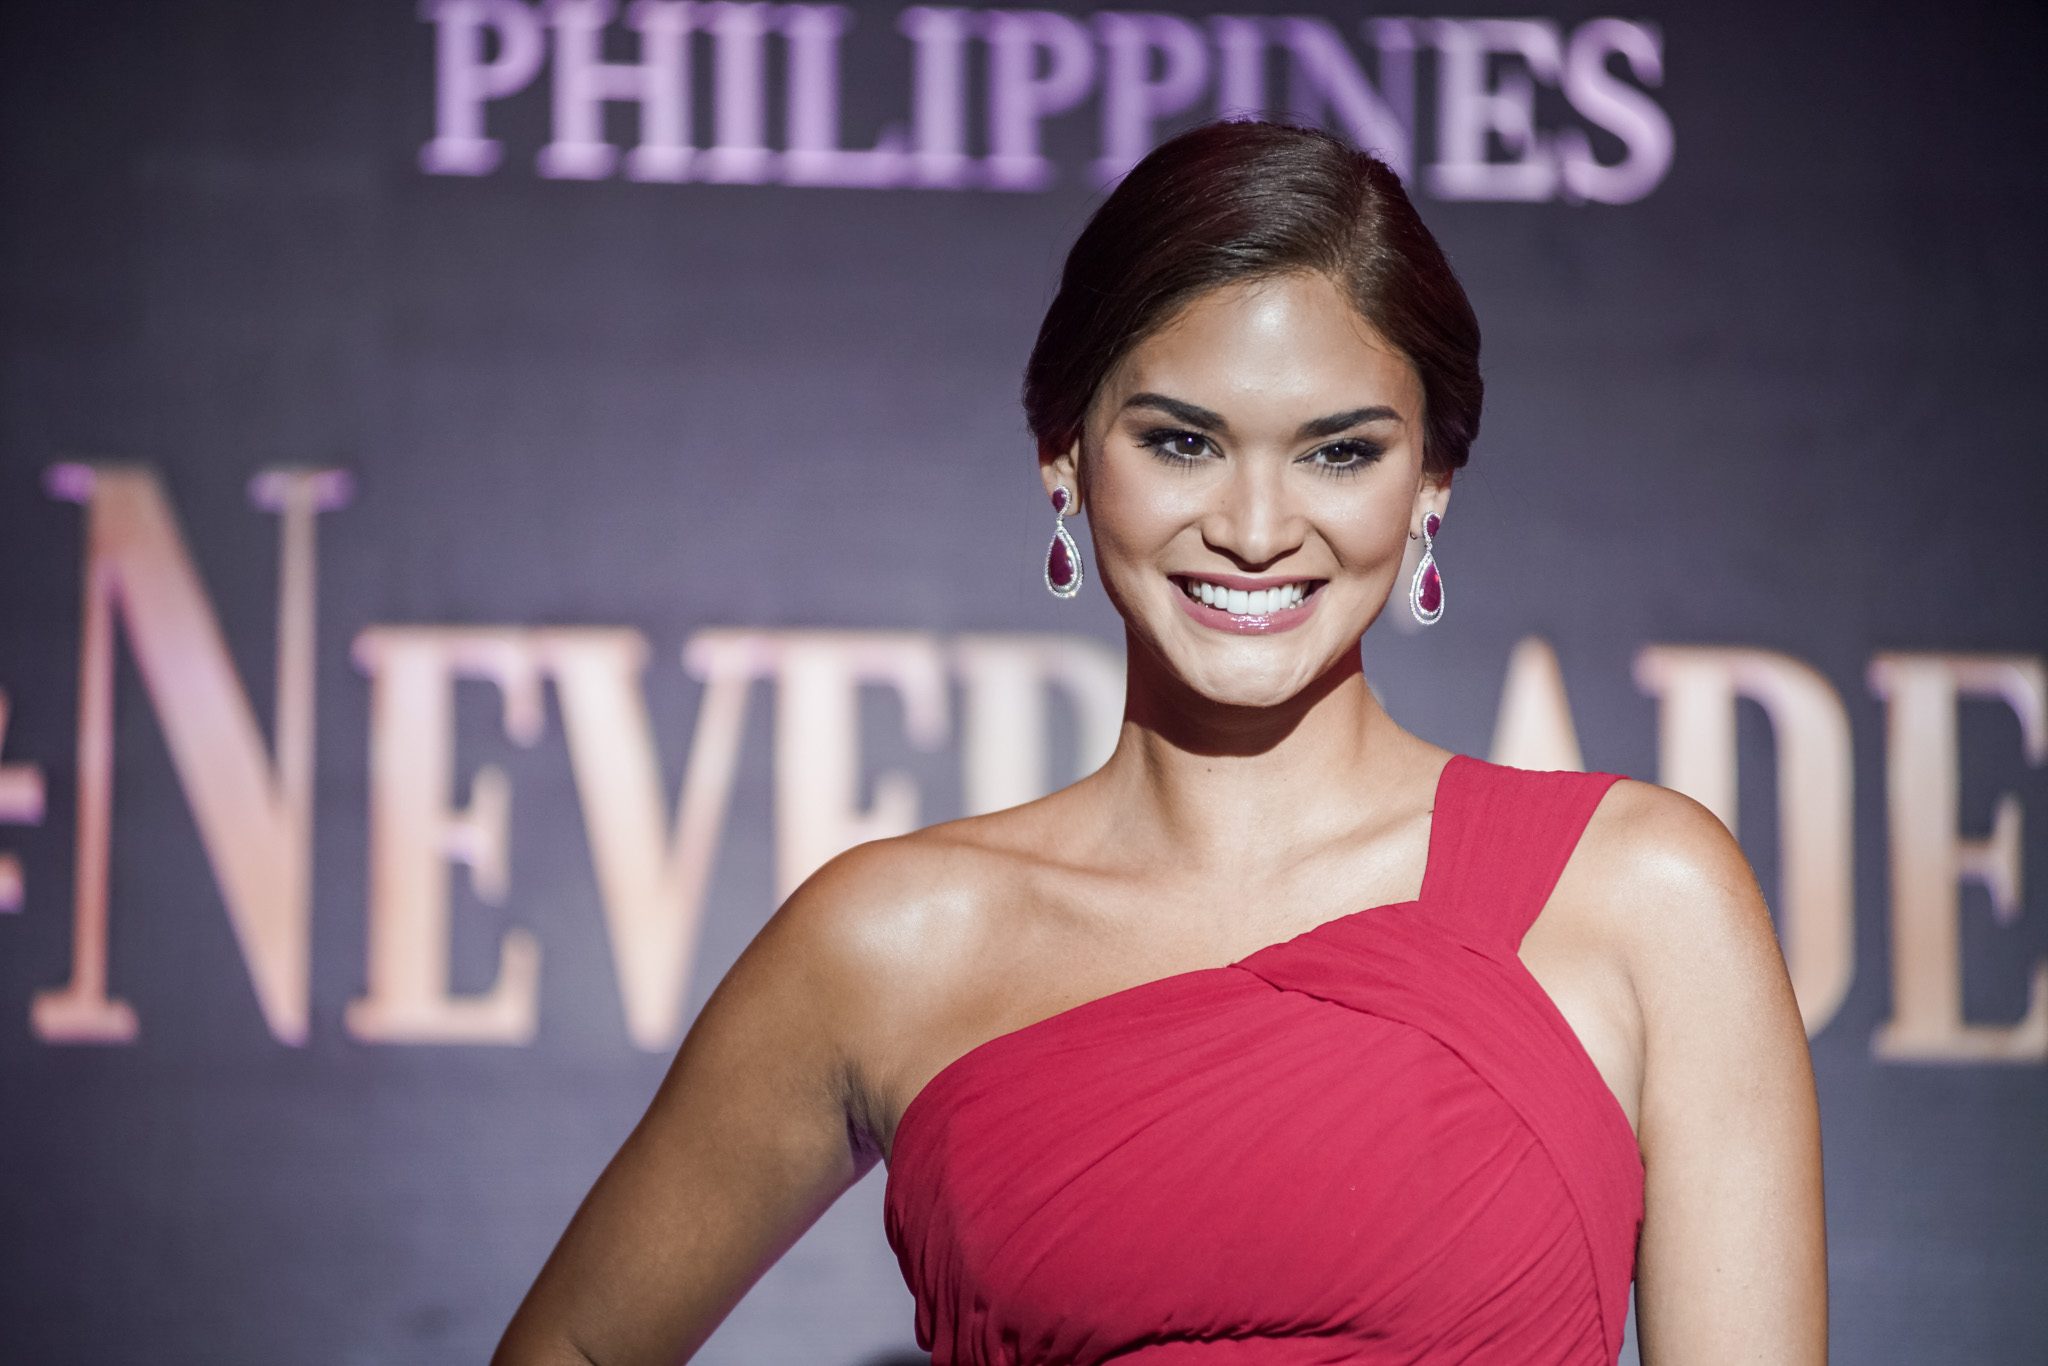 Pia Wurtzbach opens up on career plans, clarifies IMG gig